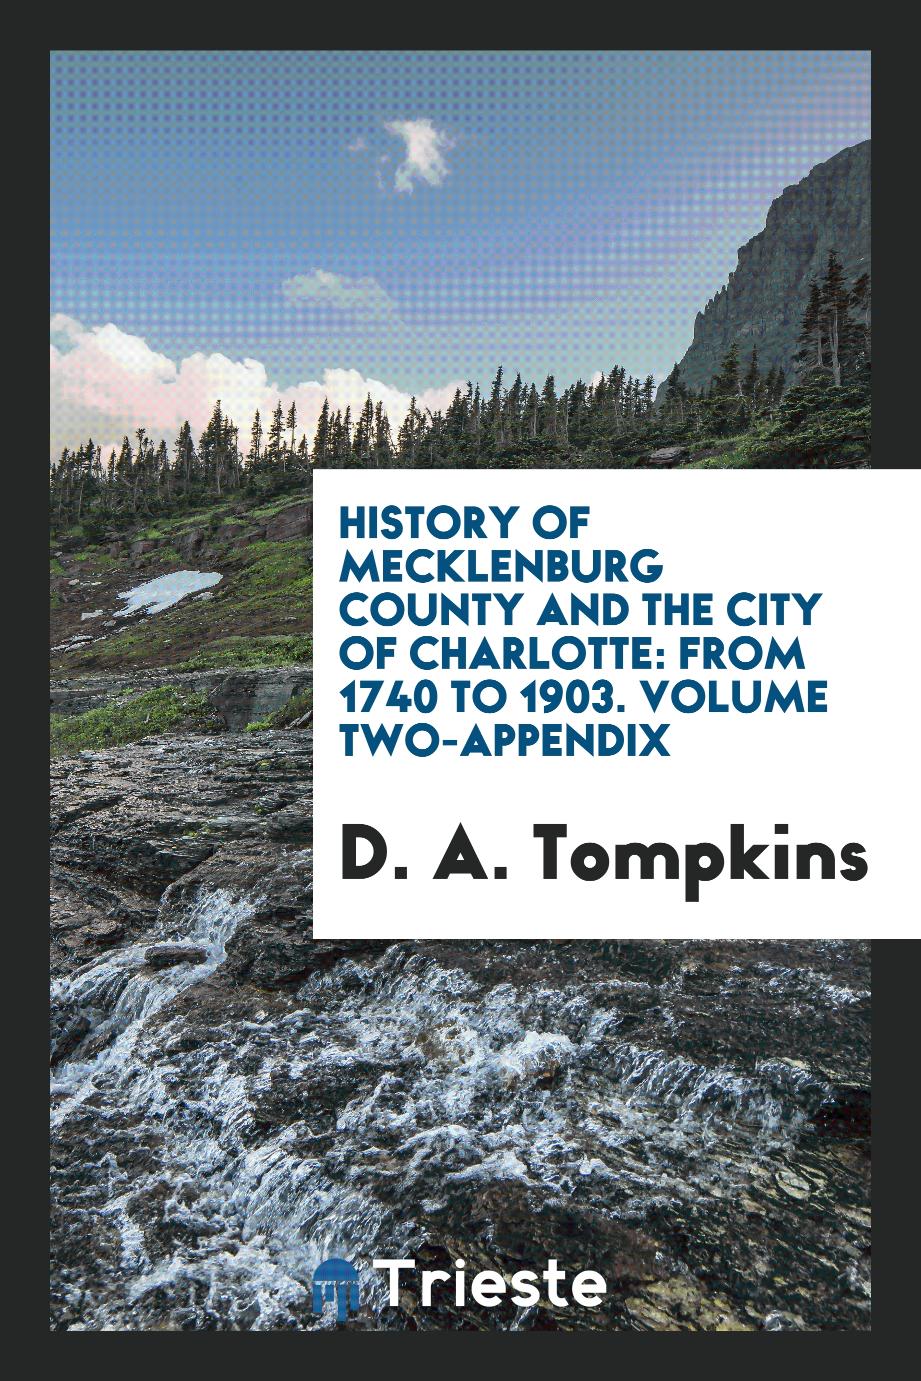 History of Mecklenburg County and the City of Charlotte: From 1740 to 1903. Volume Two-Appendix